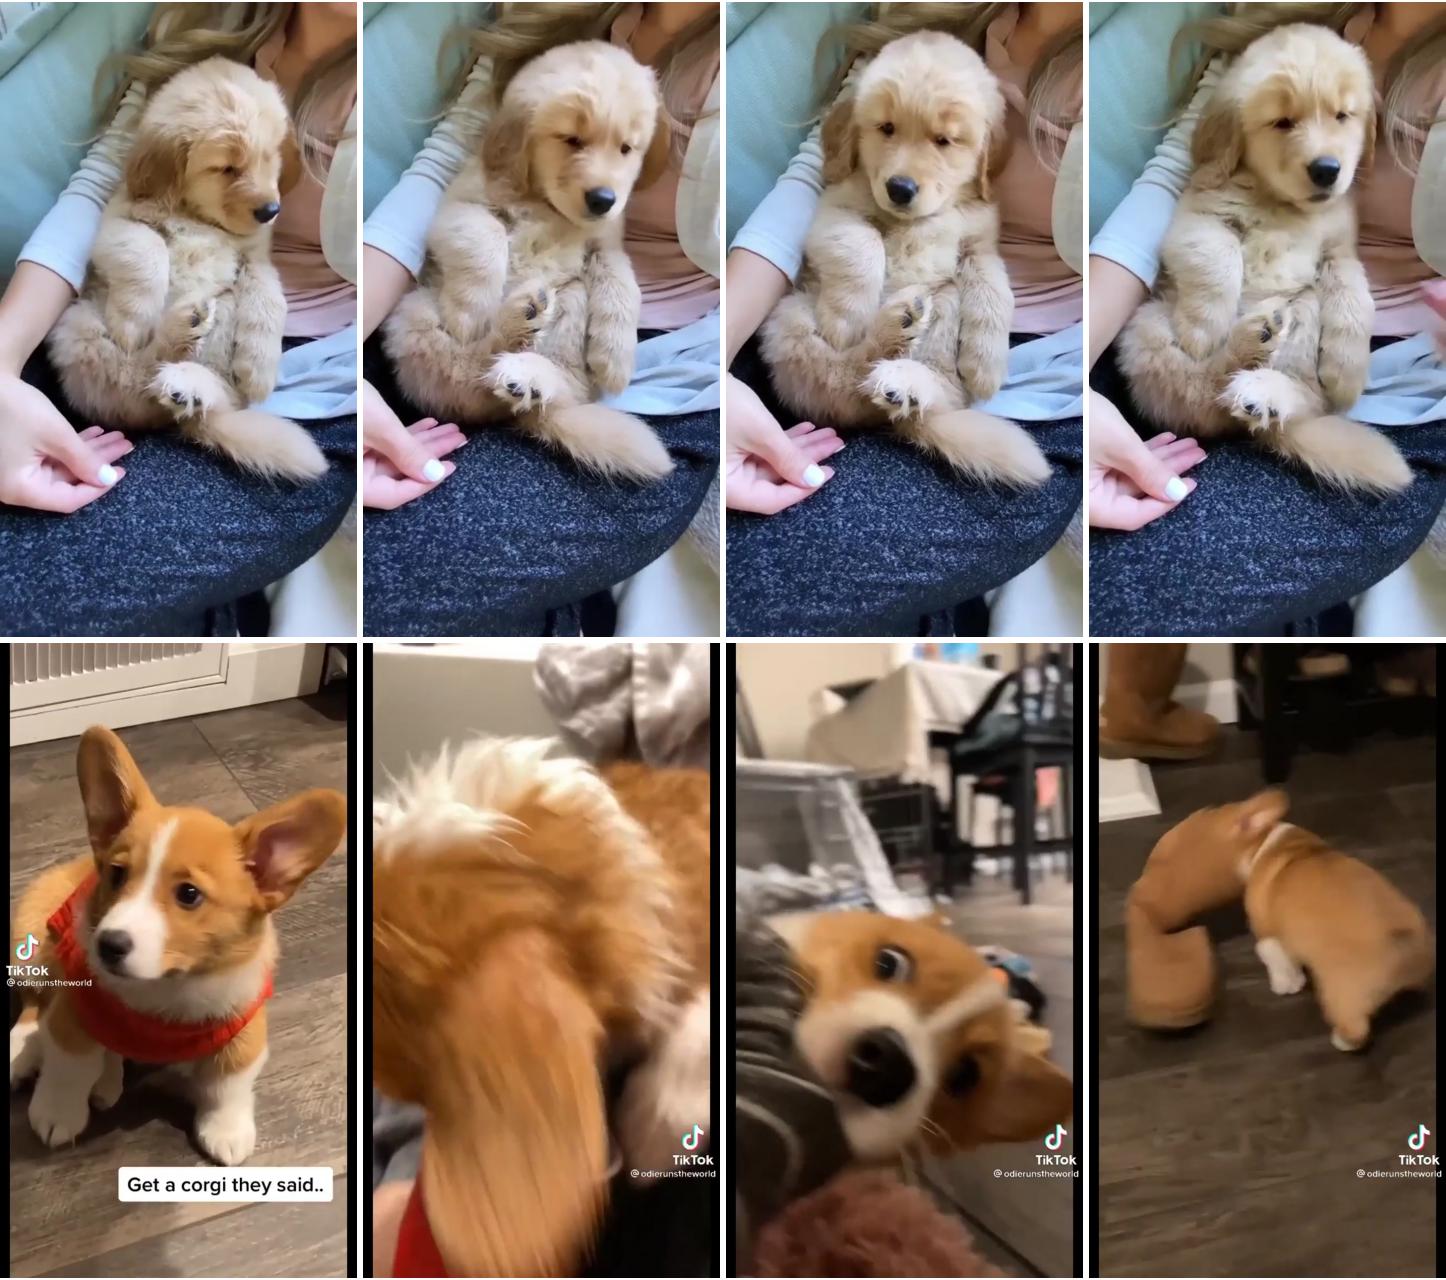 Snuggles and snaccs are a puppers best fren; get a corgi they said, it will be fun. so funny